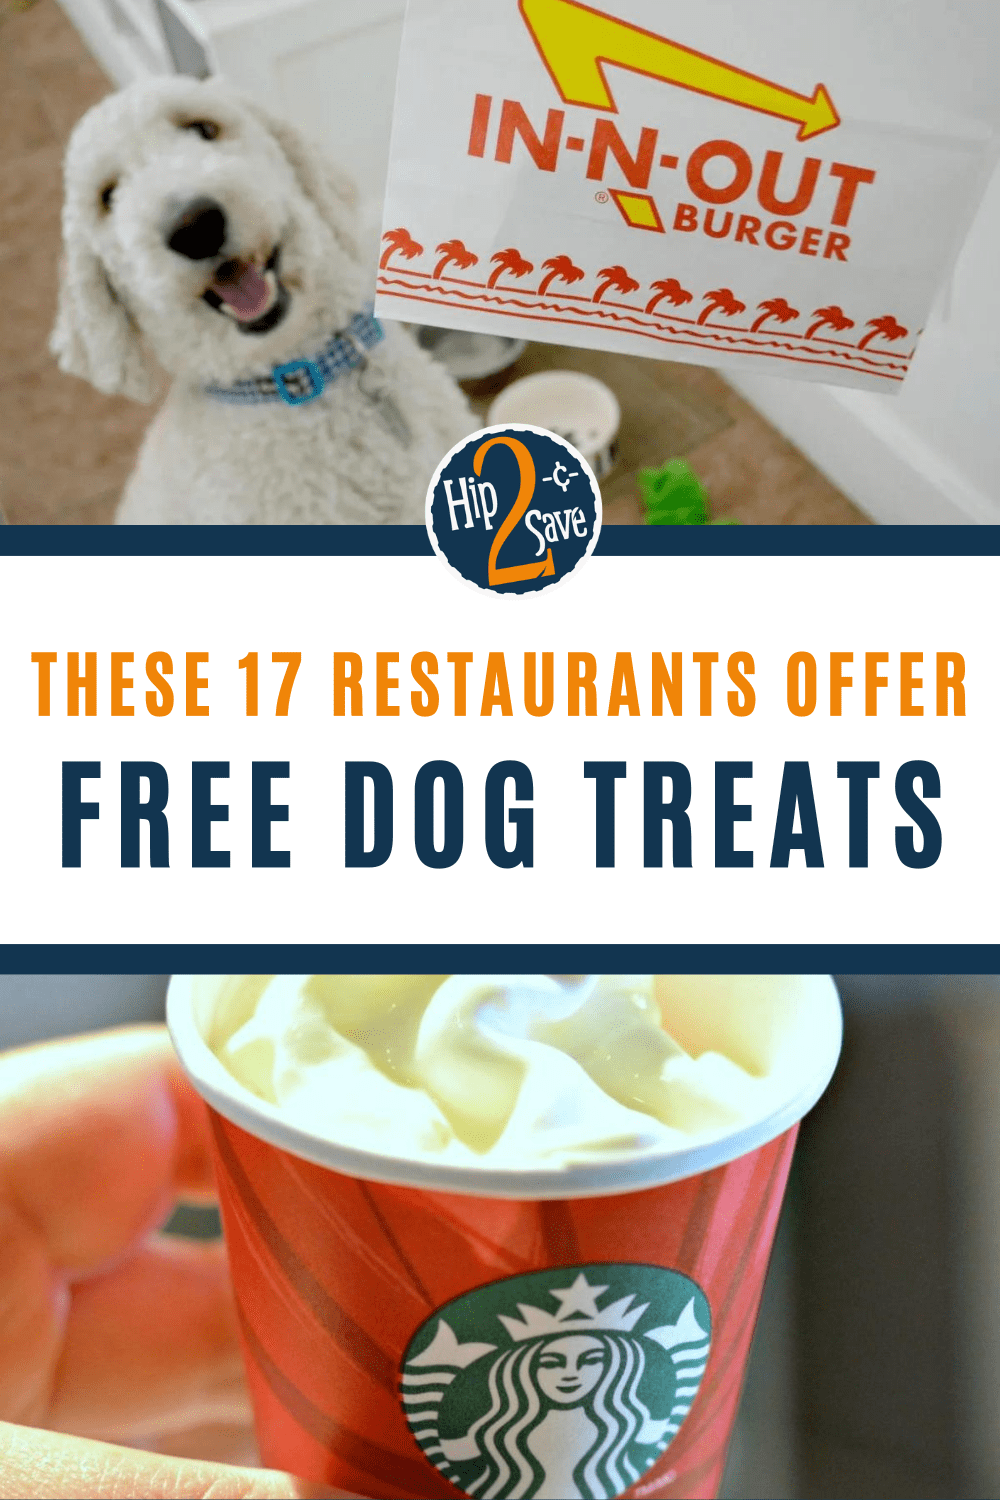 This NYC Ice Cream Shop Serves Special Pup Cups For Dogs - Secret NYC